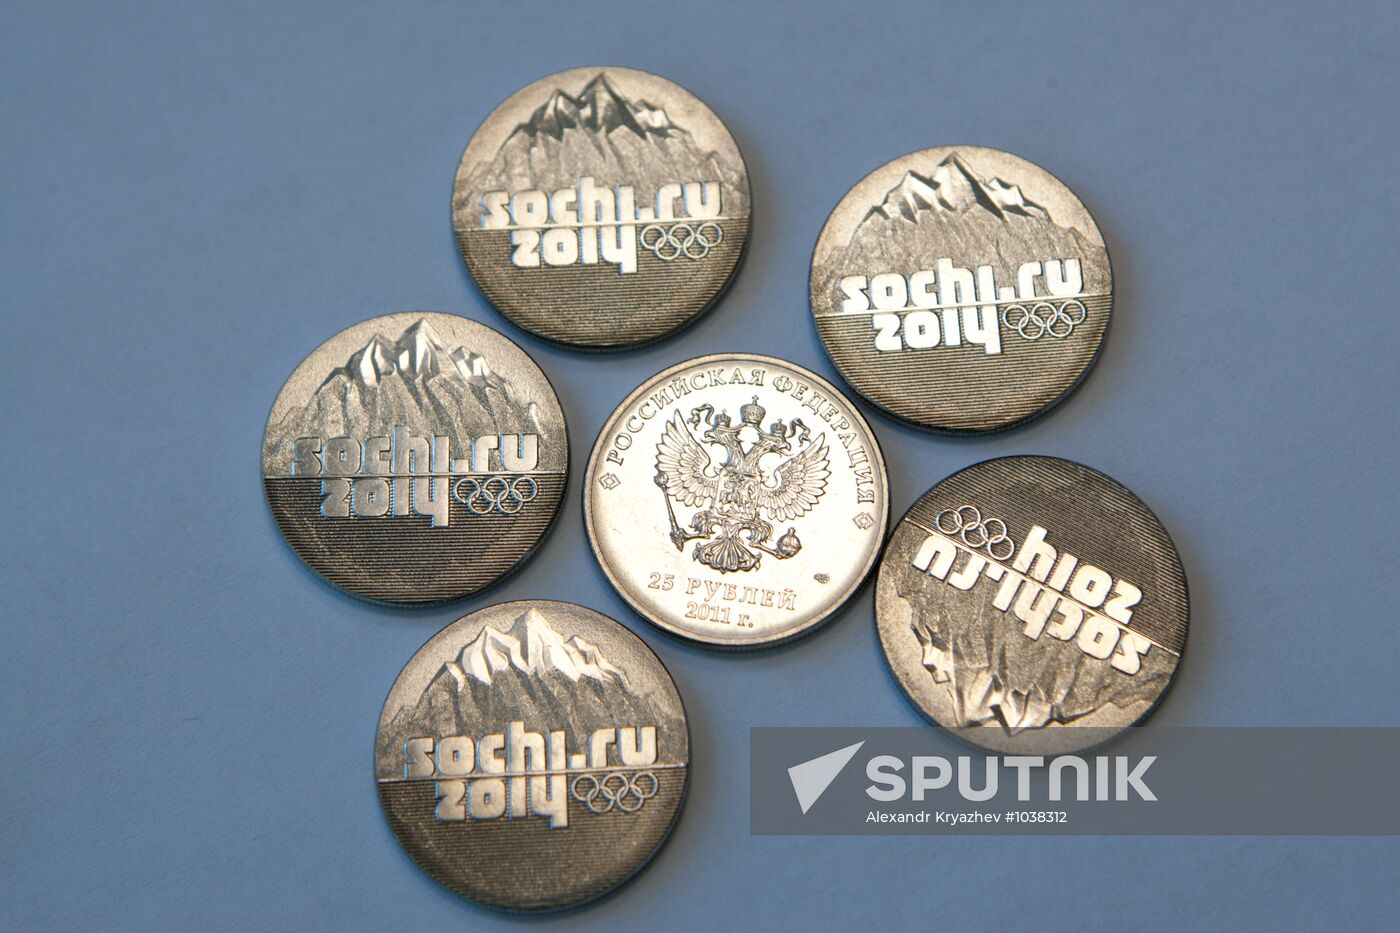 25-ruble Sochi 2014 Olympic coins